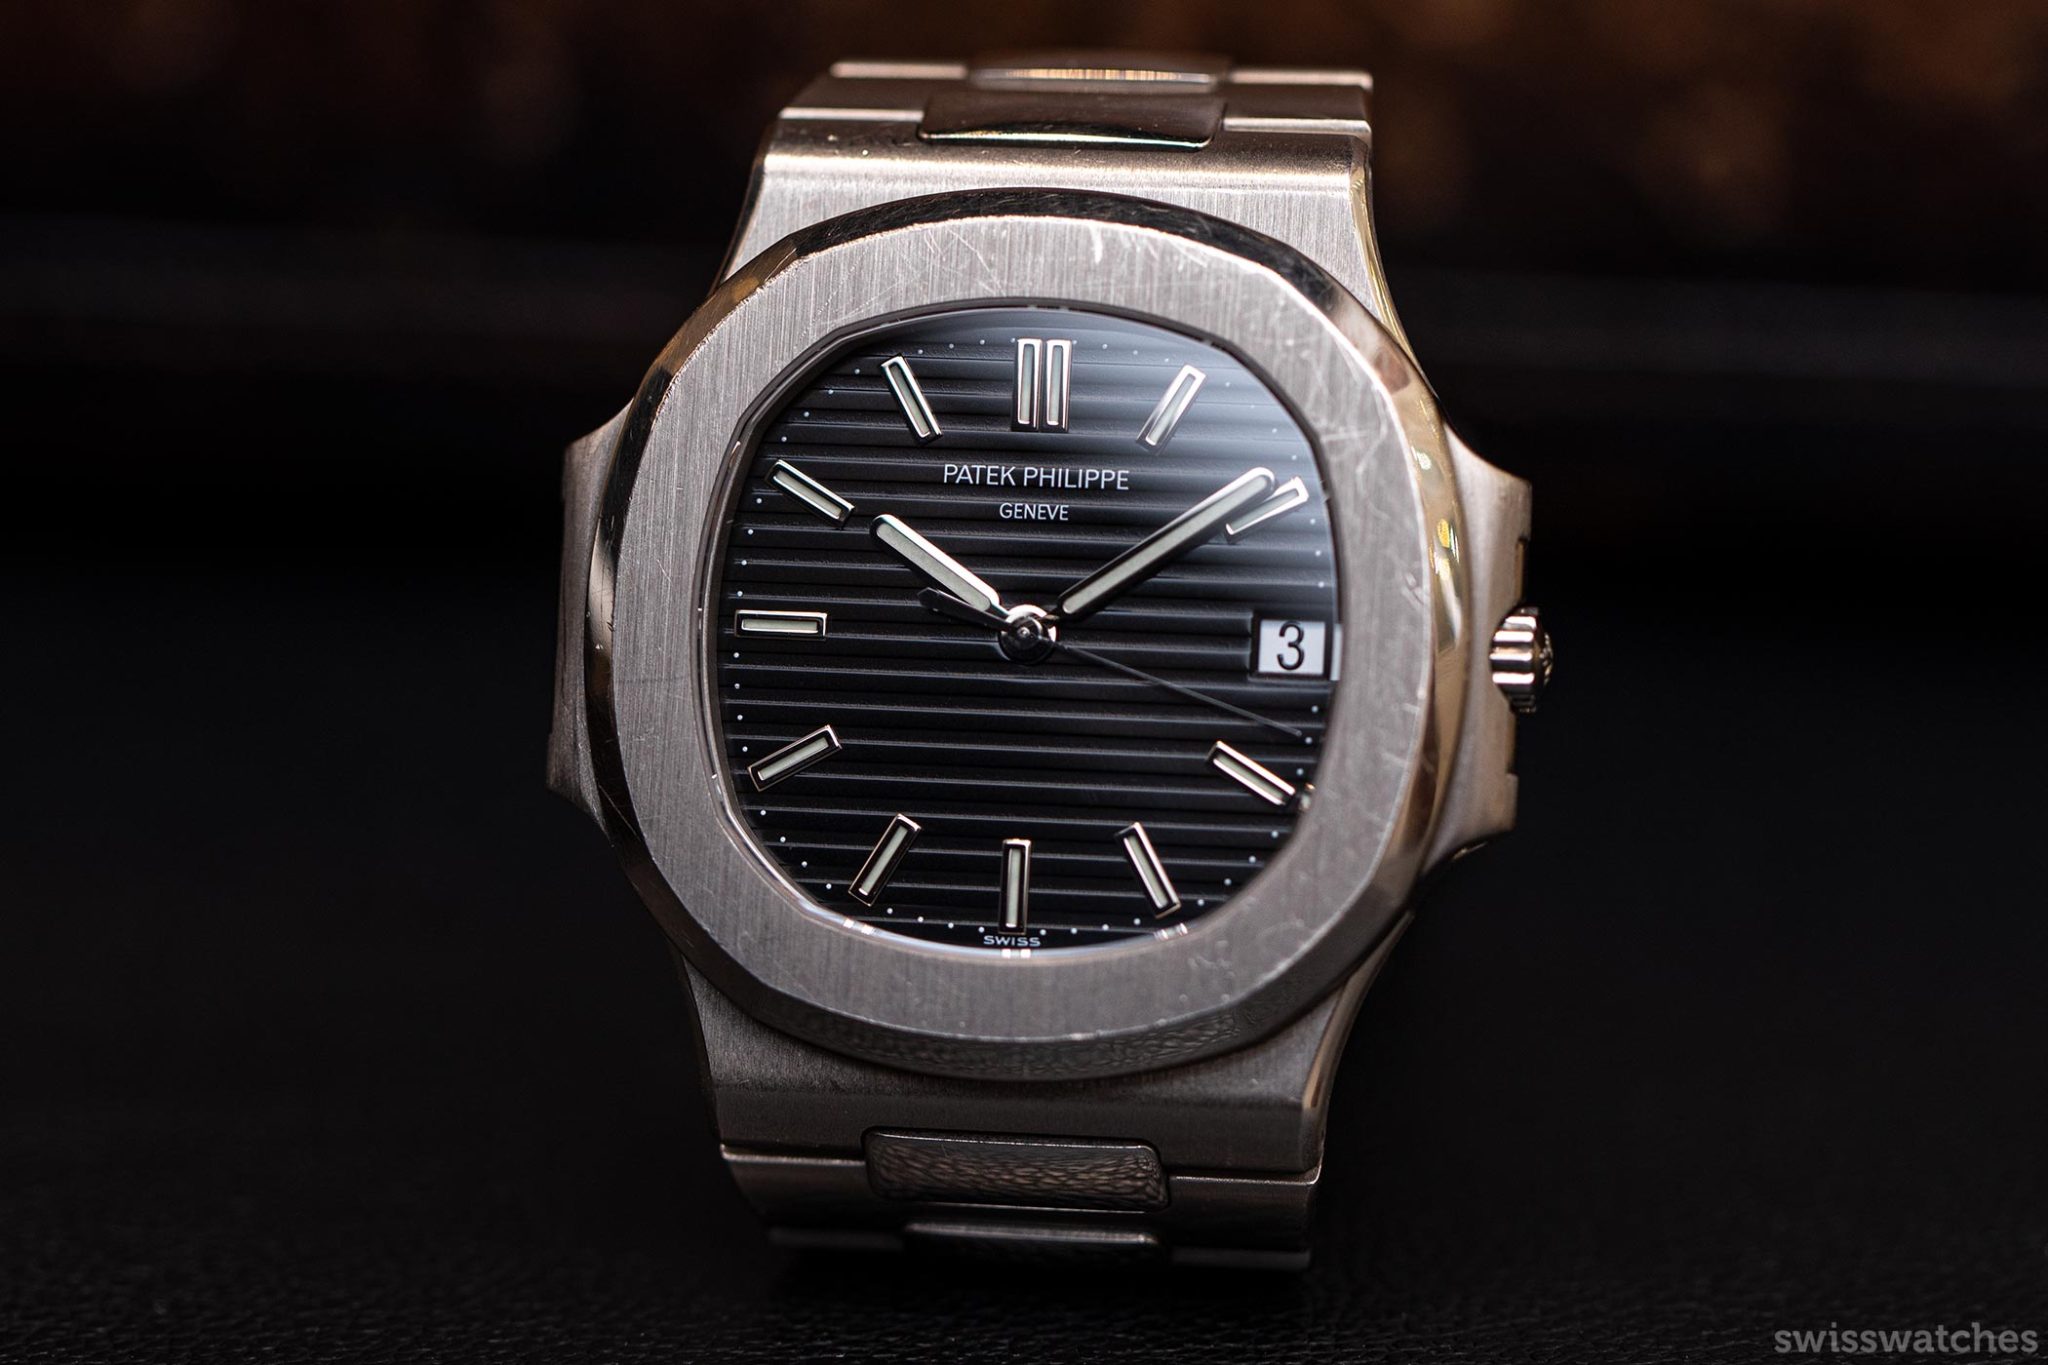 Patek Philippe set to unveil new line that may compete with its